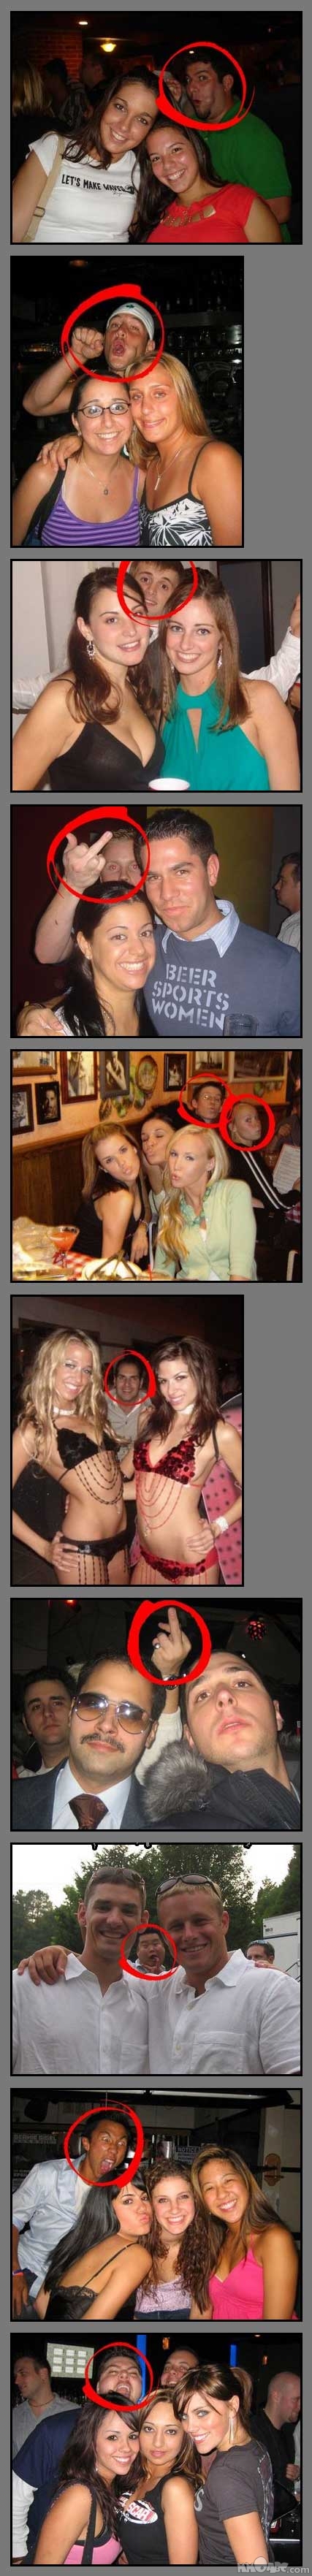 Dont you hate it when photo intruders invade into your pictures?